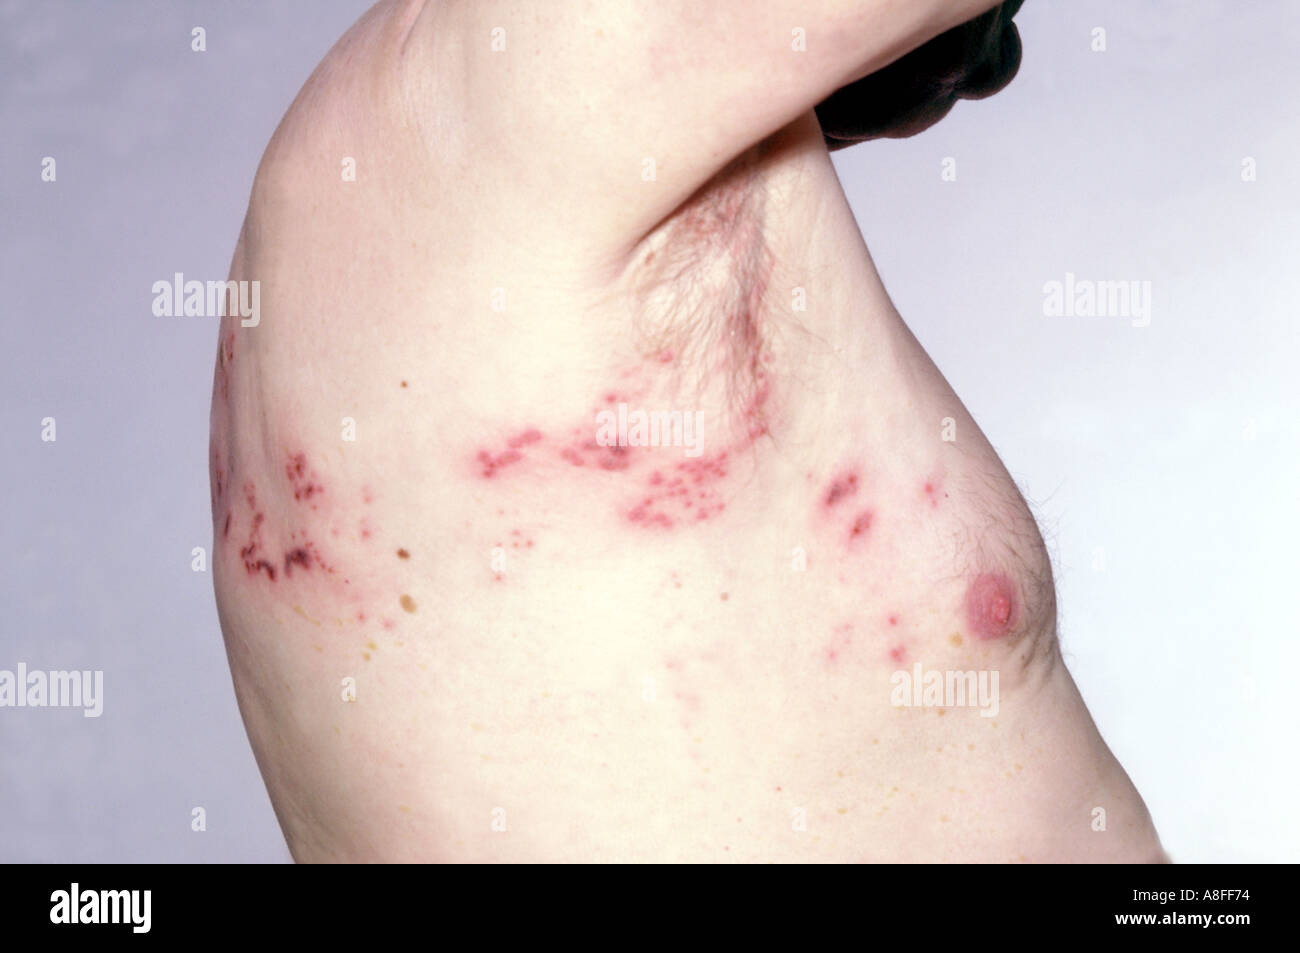 herpes zoster Stock Photo